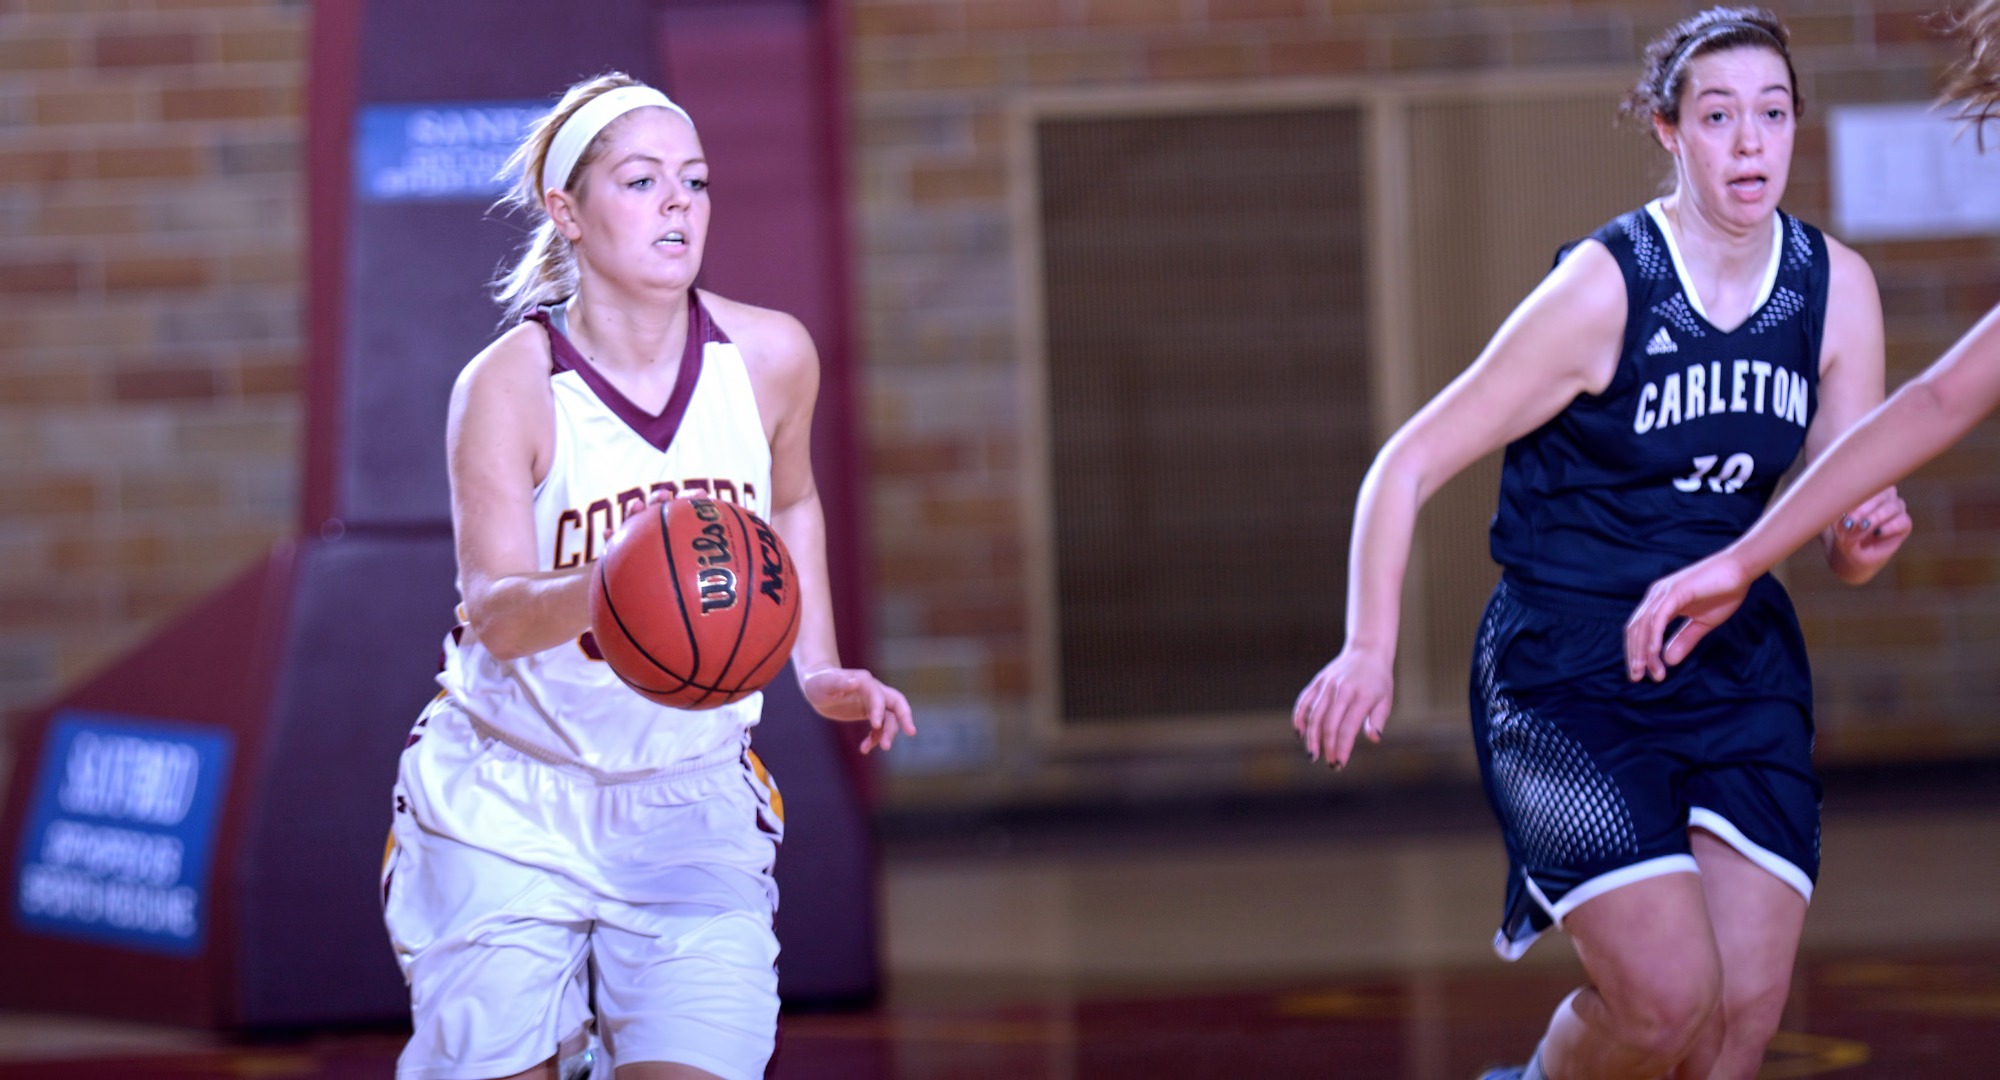 Junior Grace Wolhowe scored a career-high 24 points in the Cobbers' win at Carleton.